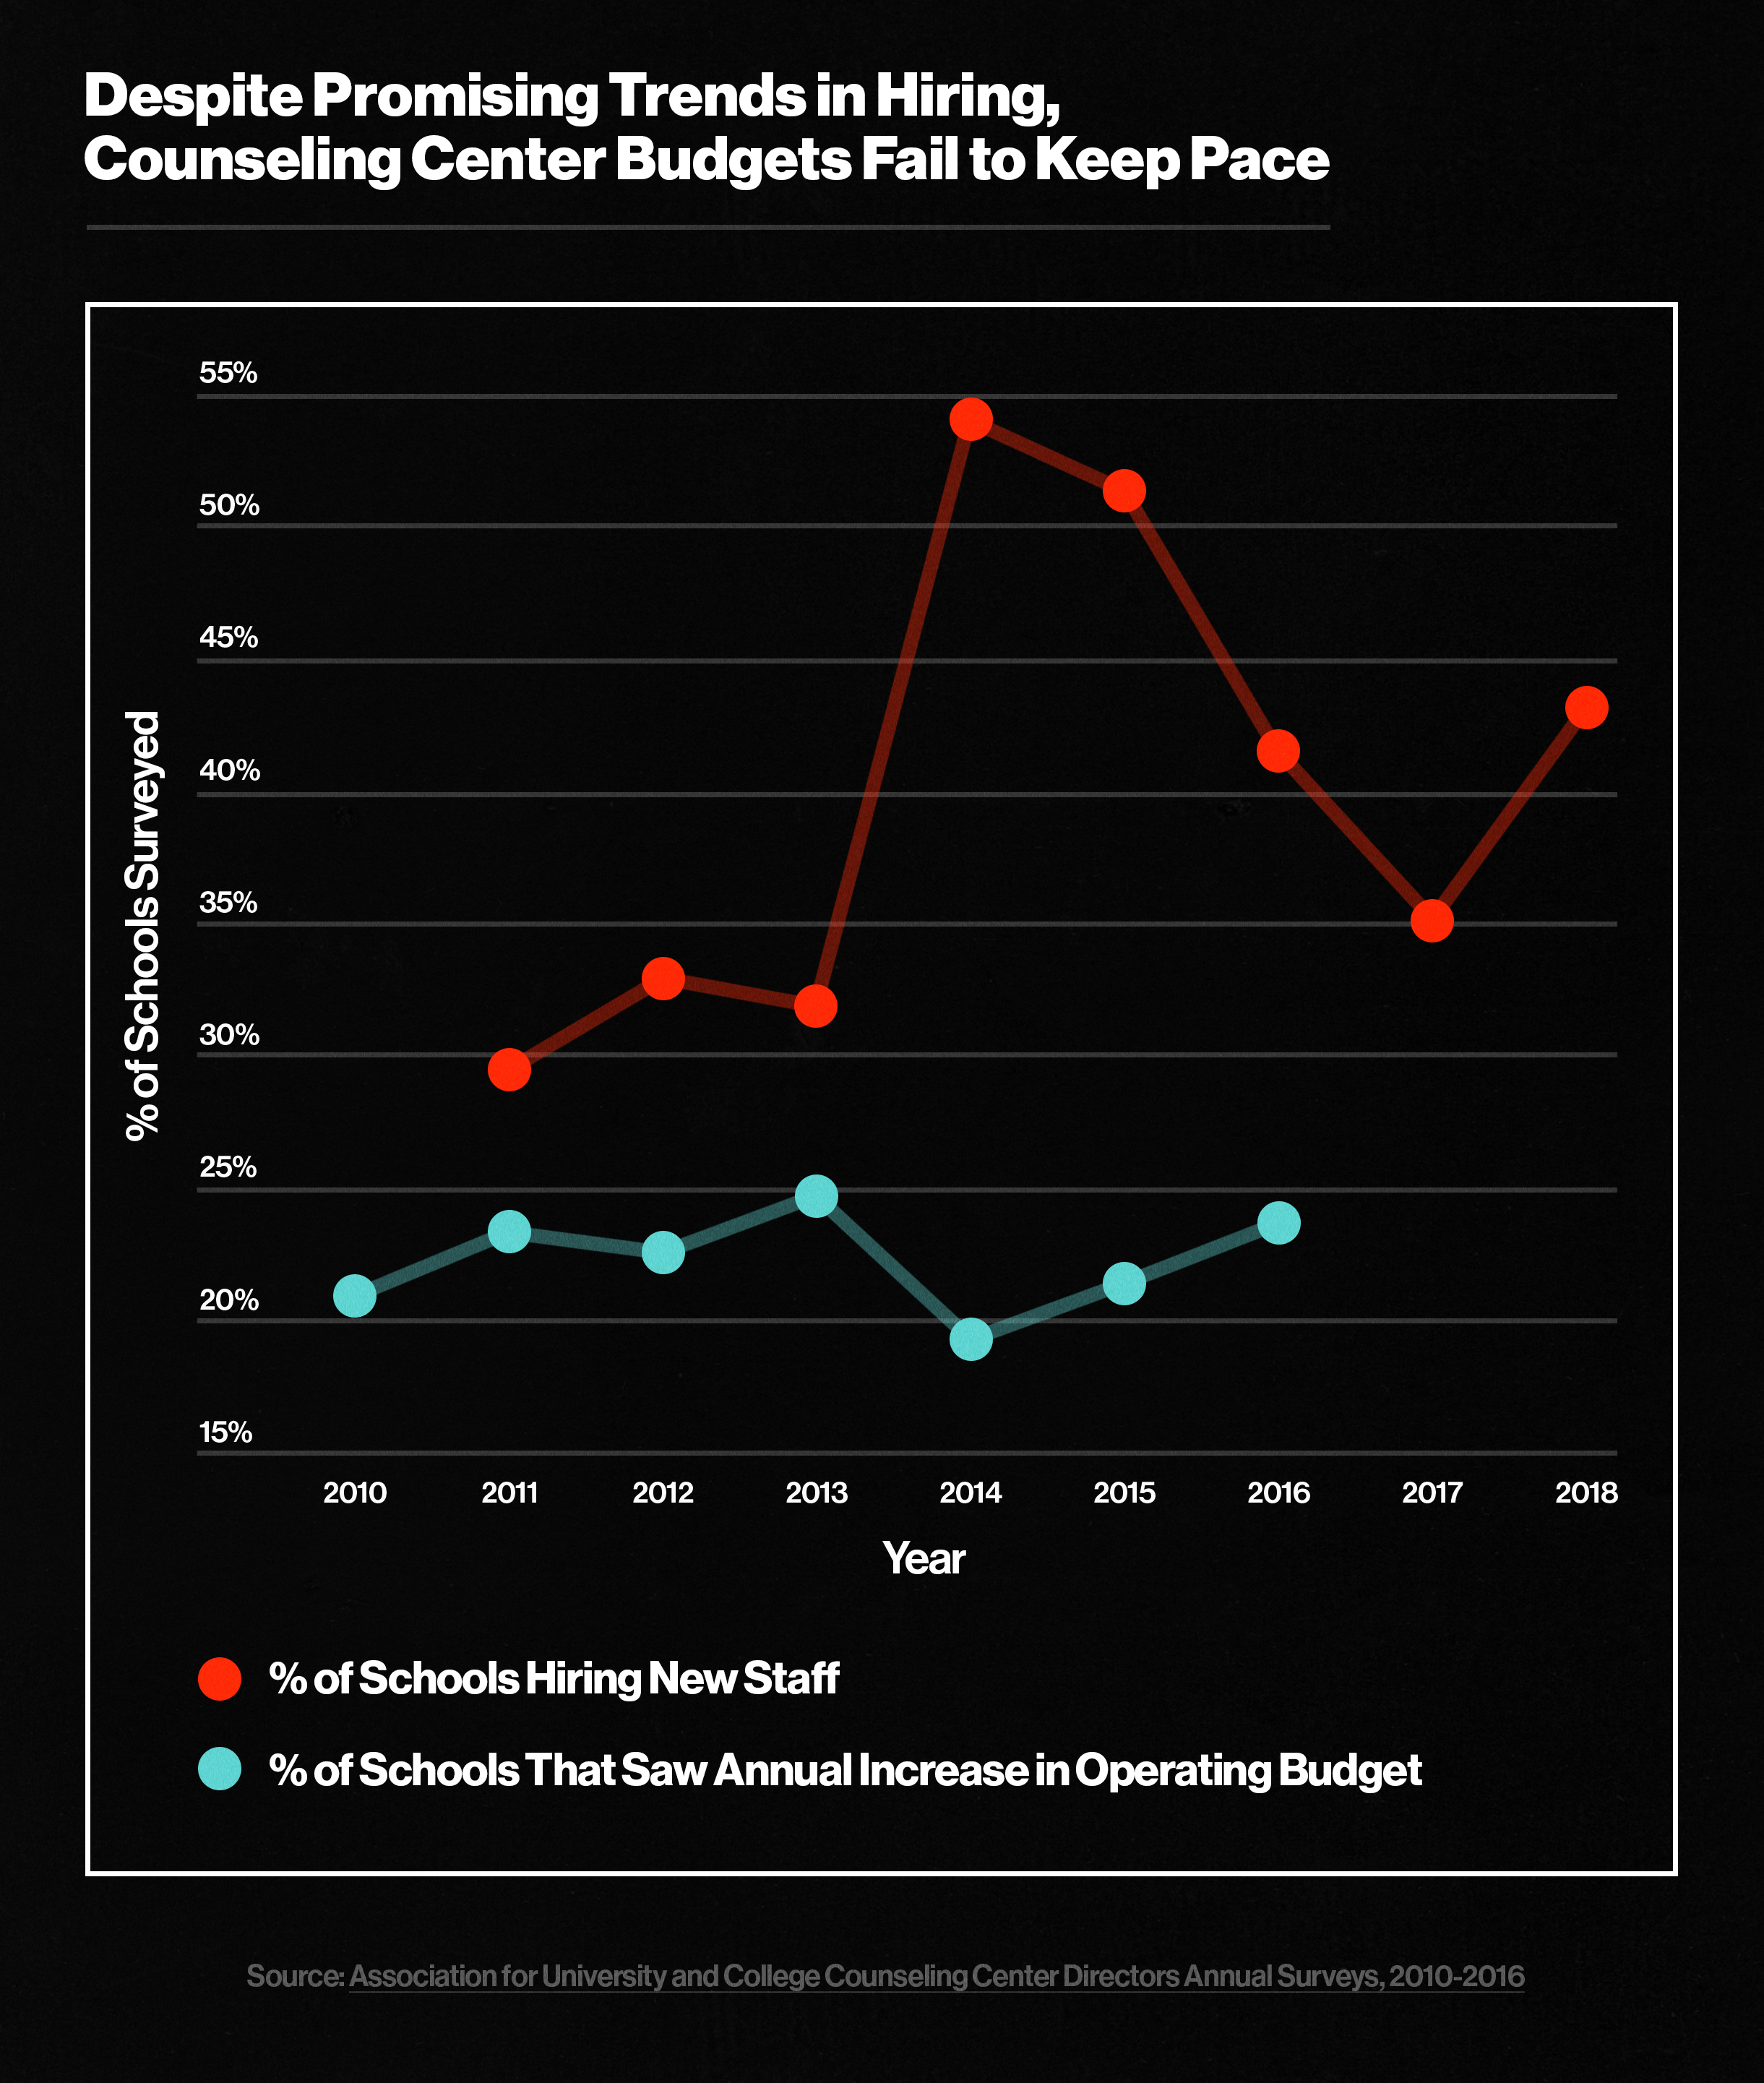 Counseling Center Budgets Fail to Keep Pace